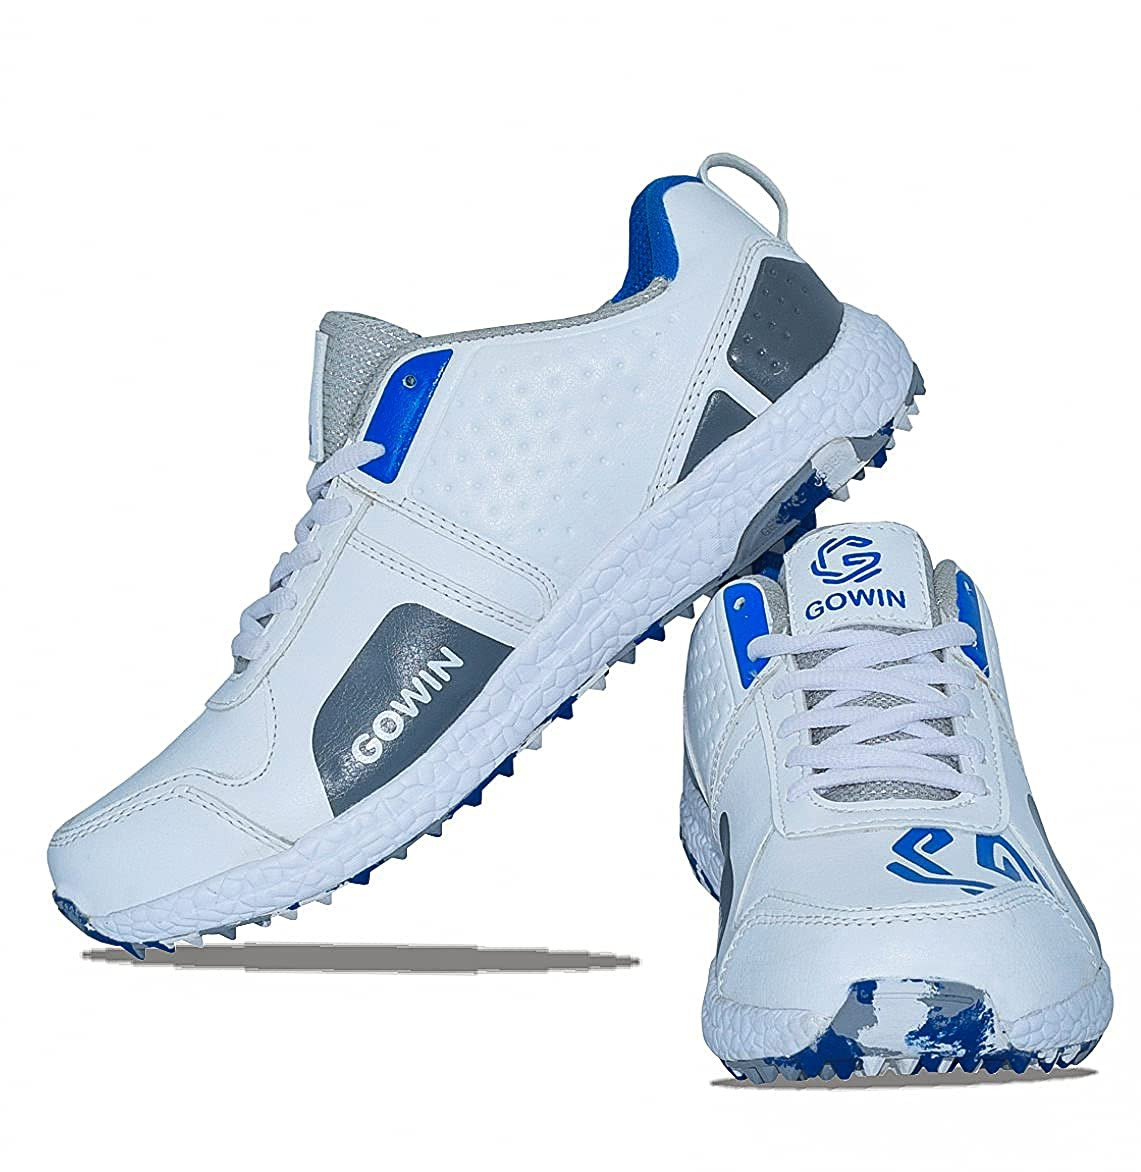 Gowin Pace-2 Cricket Shoes